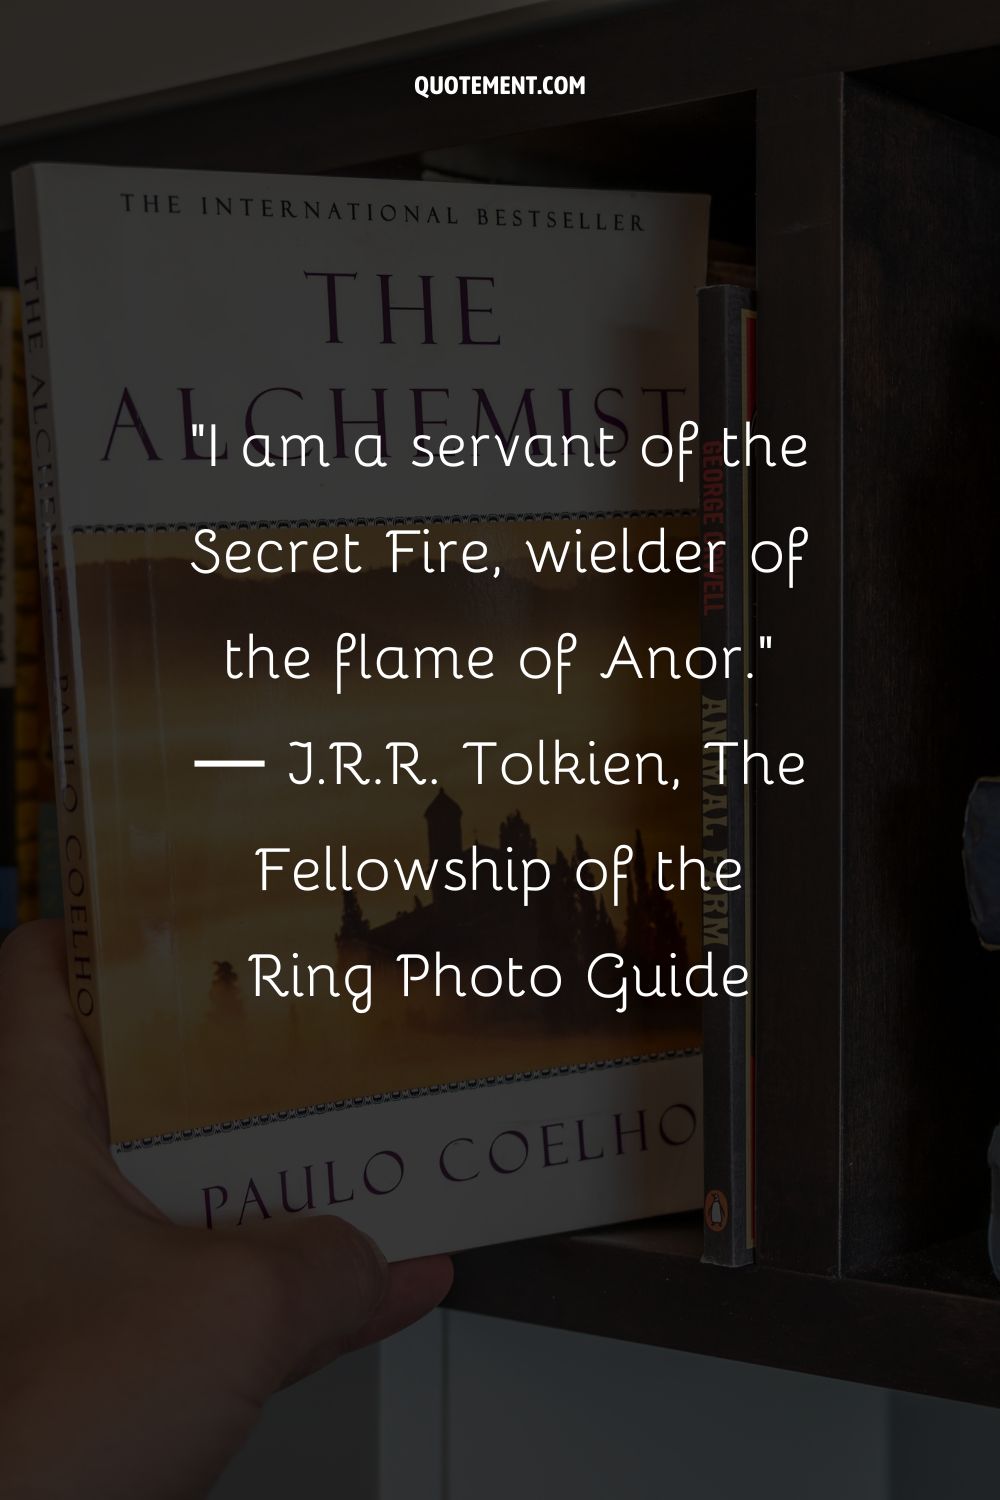 I am a servant of the Secret Fire, wielder of the flame of Anor.